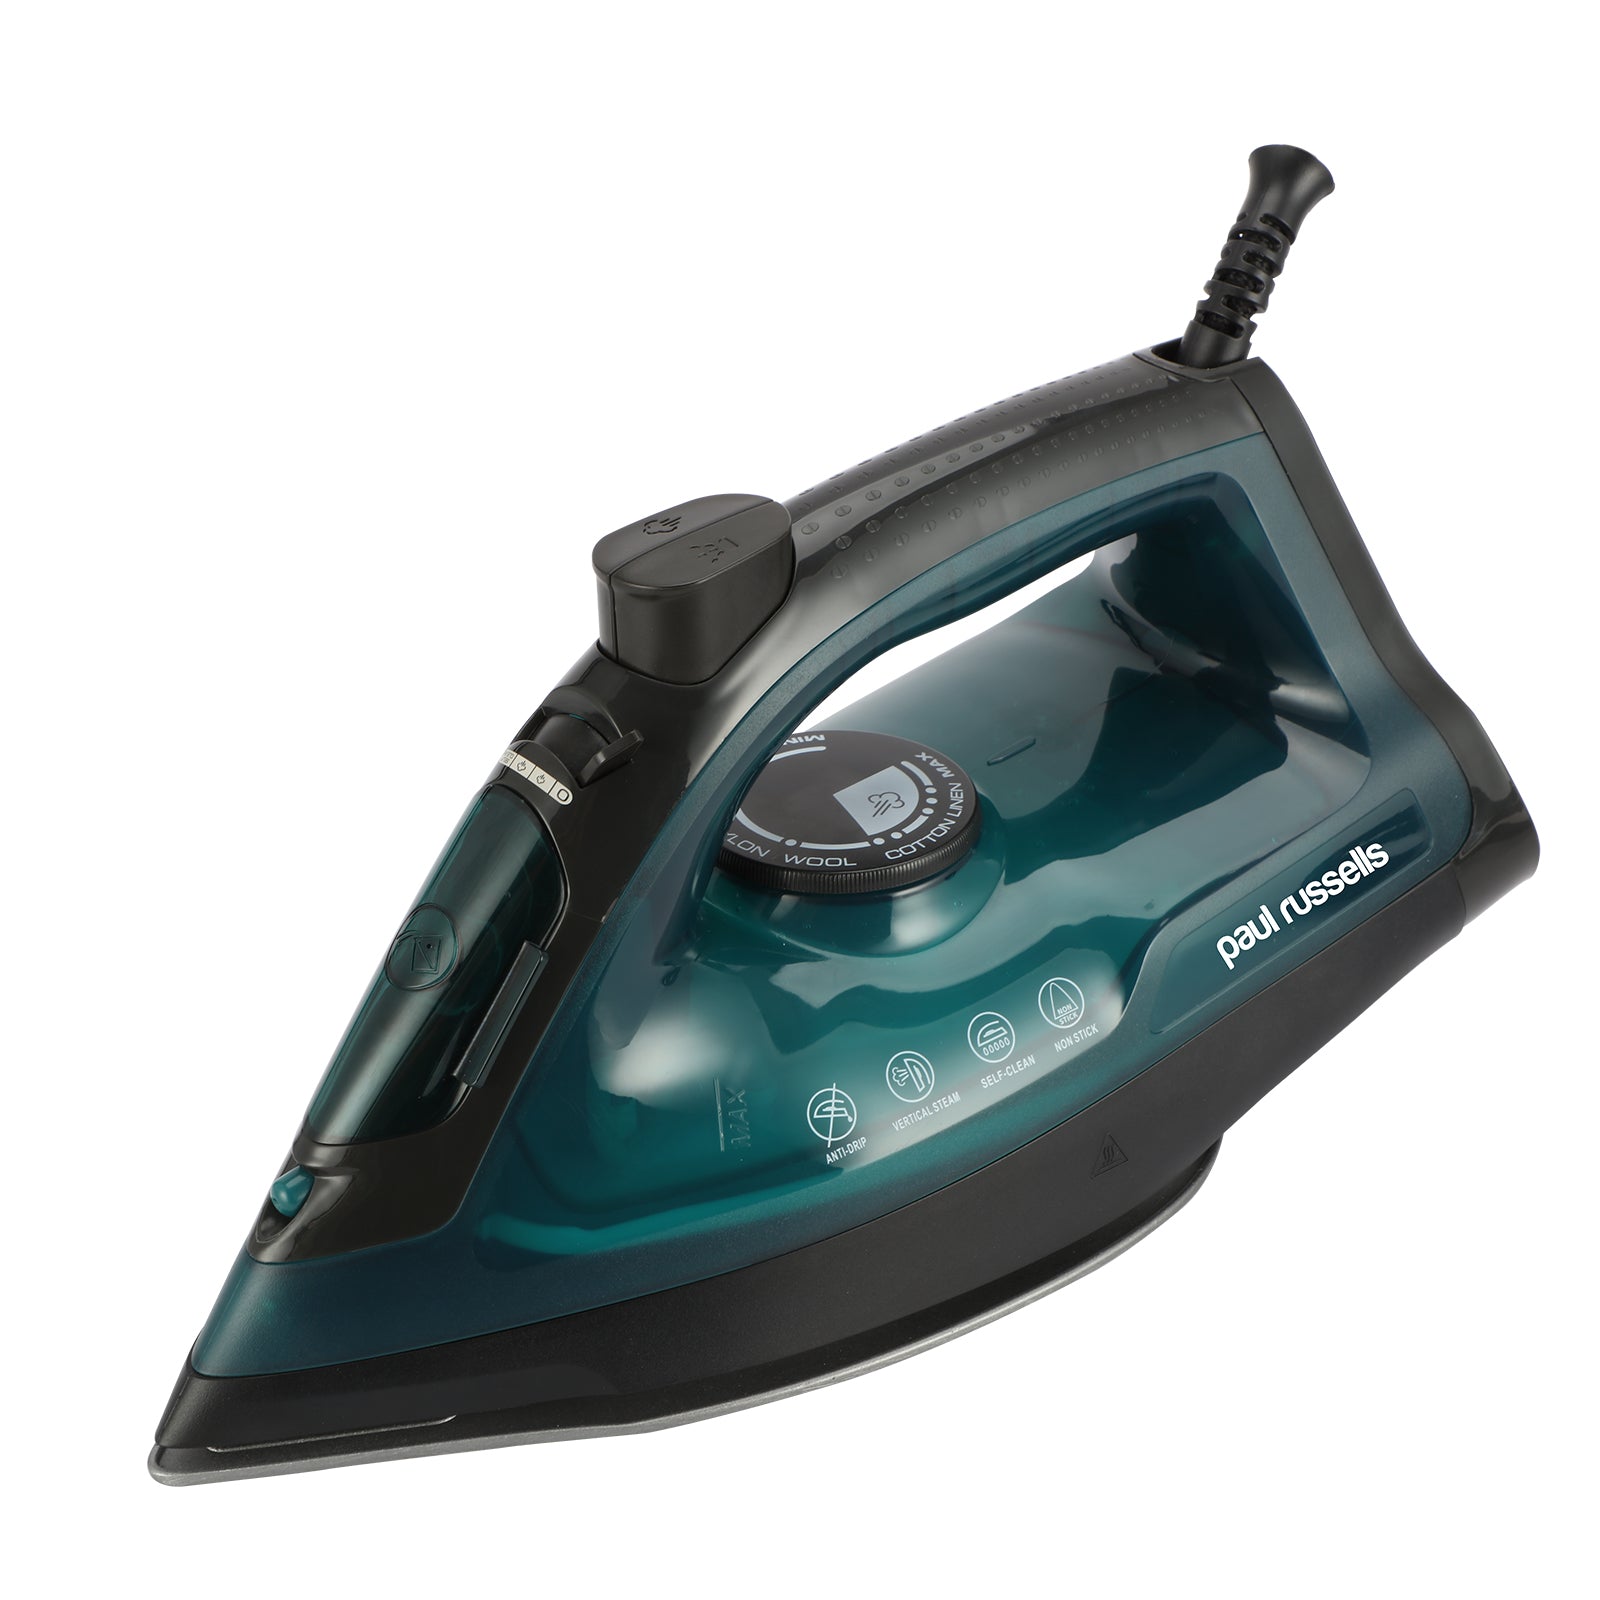 Paul Russells 2400W Steam Iron - Continuous 30g/min Steam, 240V Variable Output, Anti-Drip/Anti-Calc Filter, Vertical Jet Steam Boost, 250ml Water Tank, Power Indicator Light